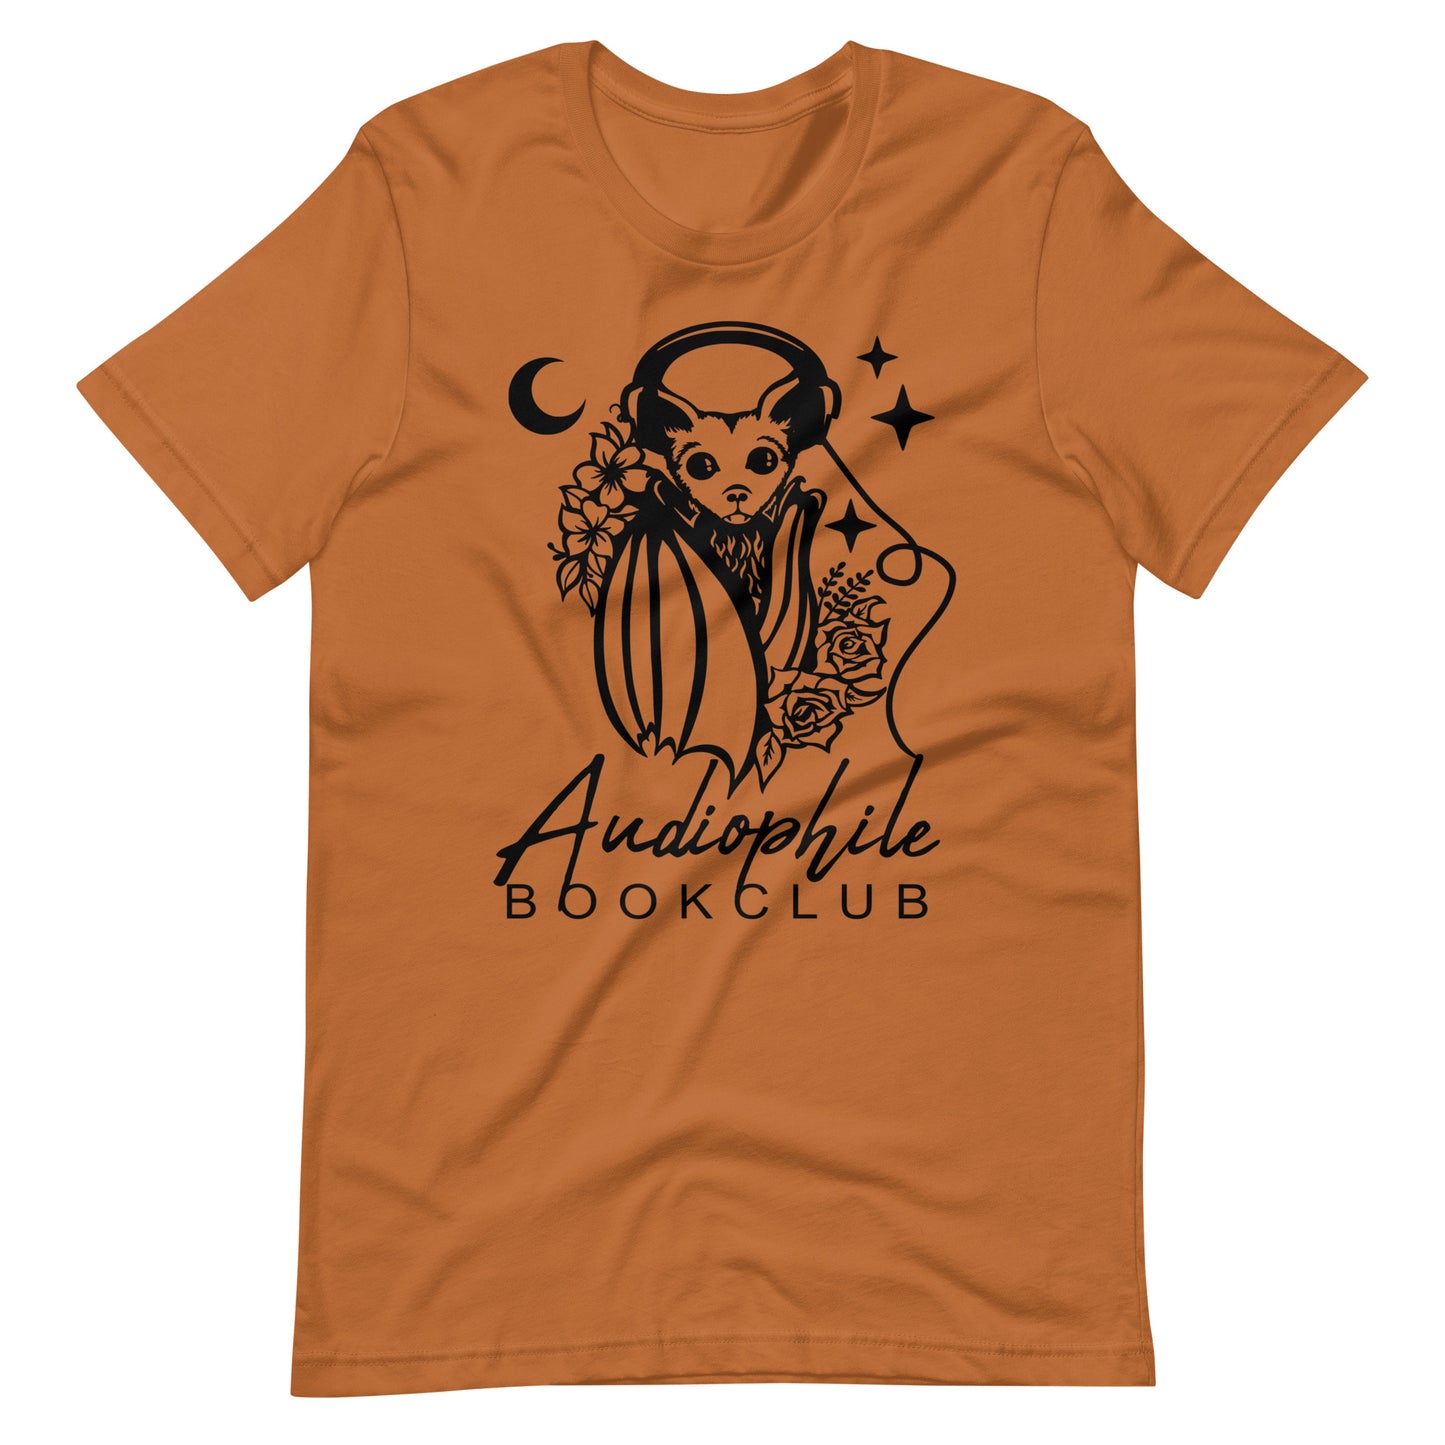 Audiophile Book Club Unisex t-shirt for FireDrake Artistry 